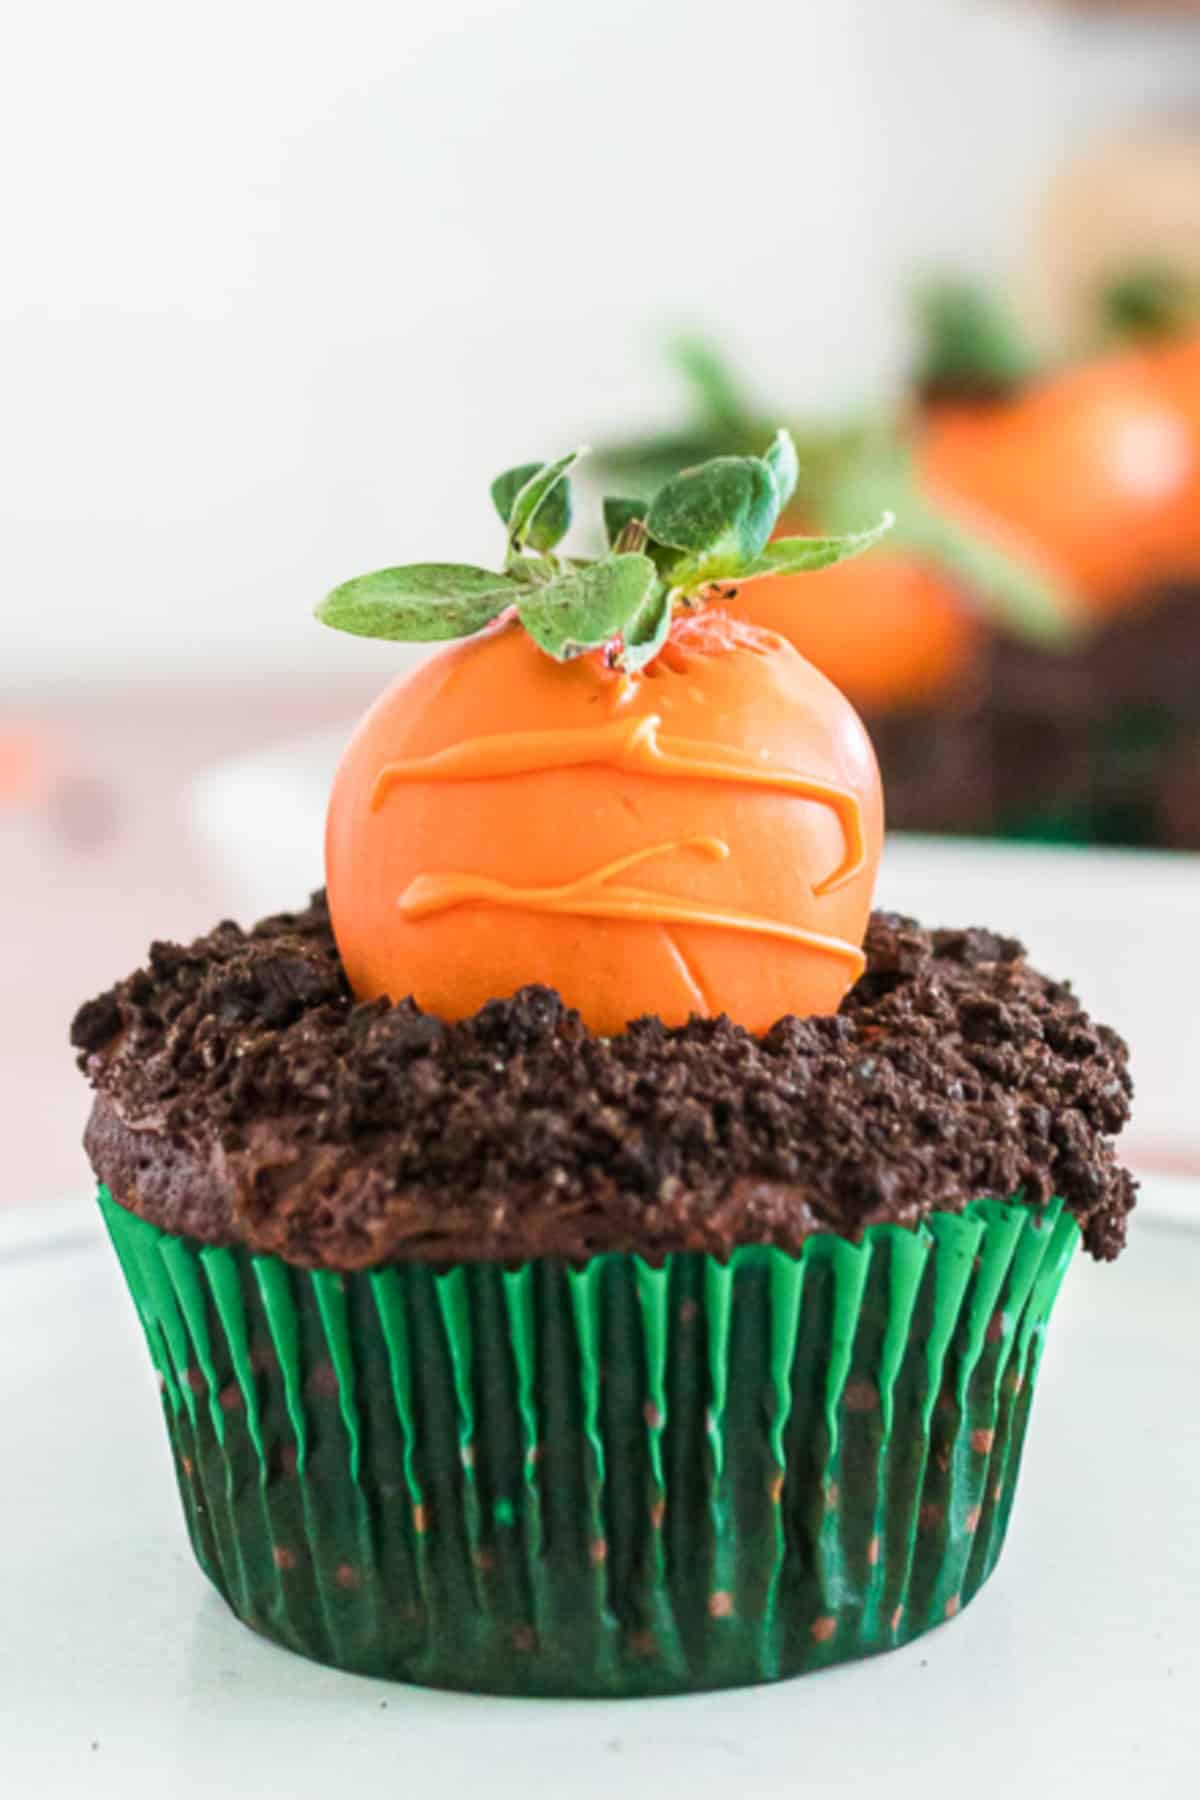 Close up of a cupcake decorated to look like a carrot in the ground with chocolate and an orange chocolate dipped strawberry on top close up from the side.